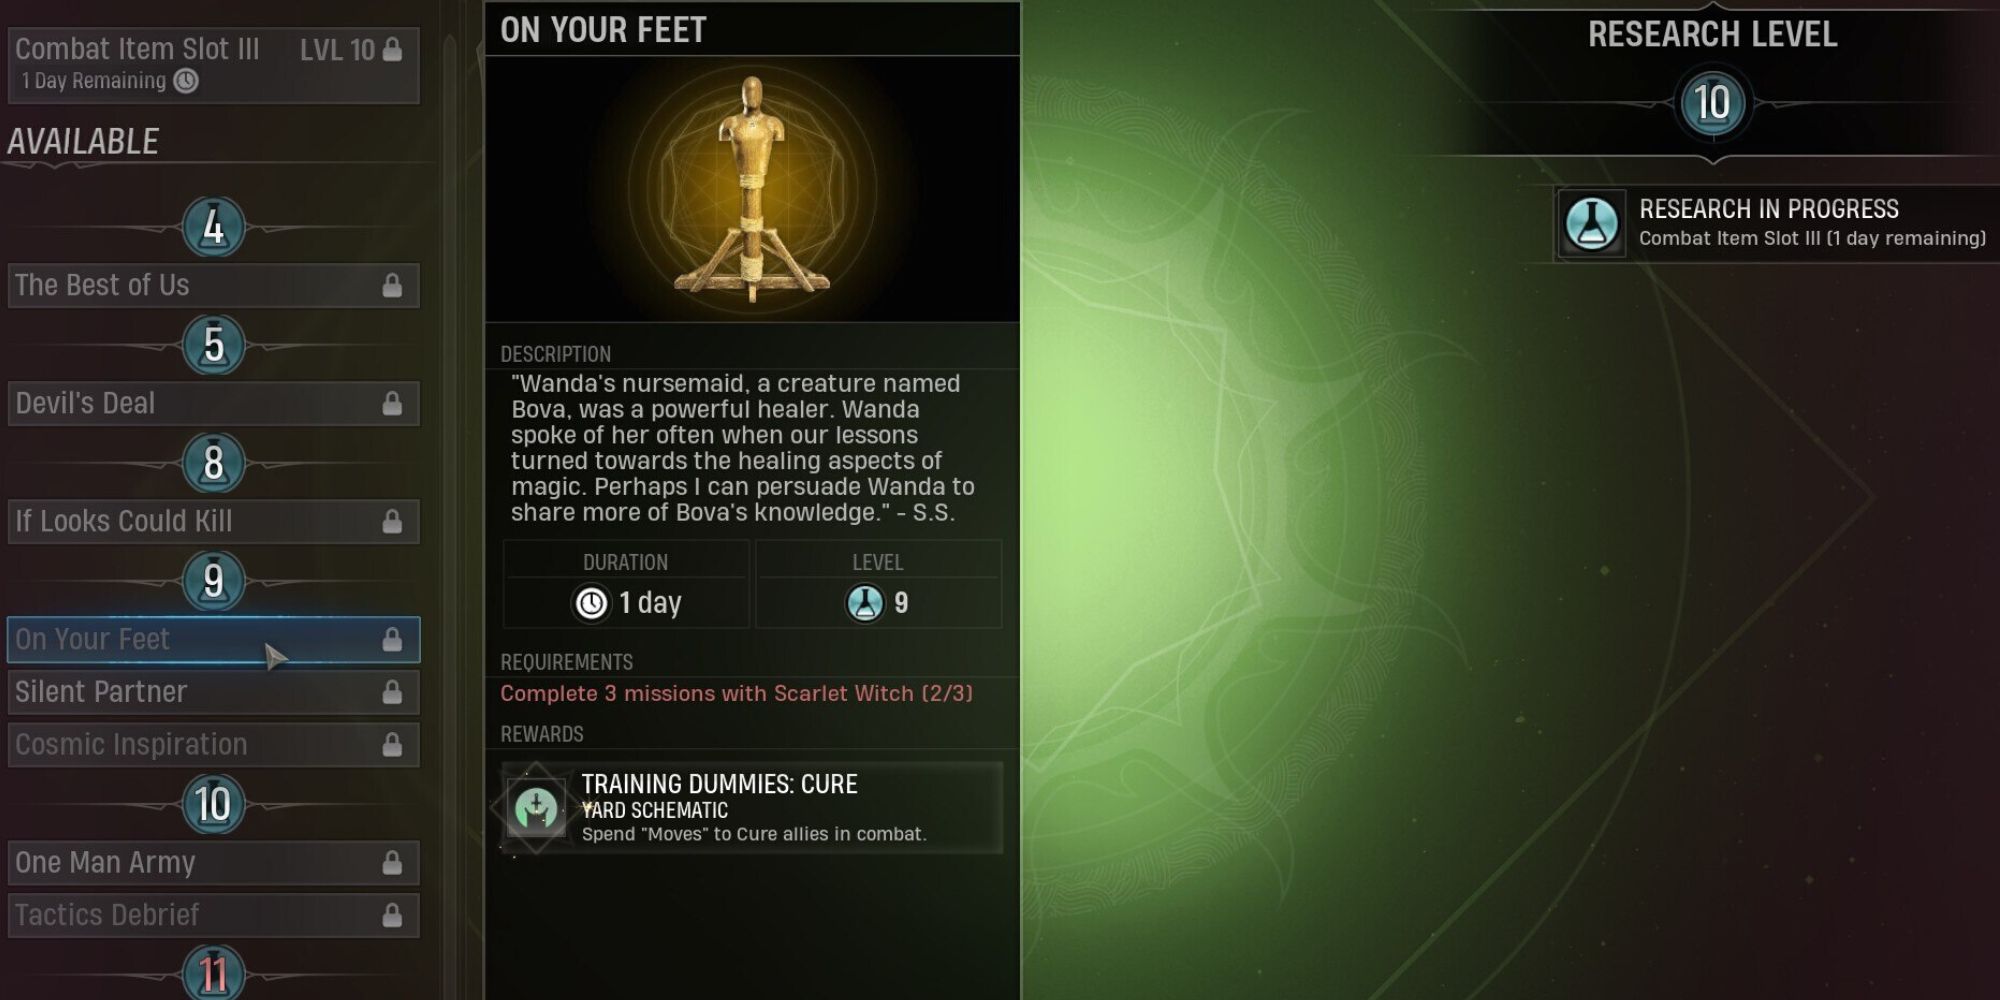 Research screen showing the "On Your Feet" schematic which can only be researched at level nine.